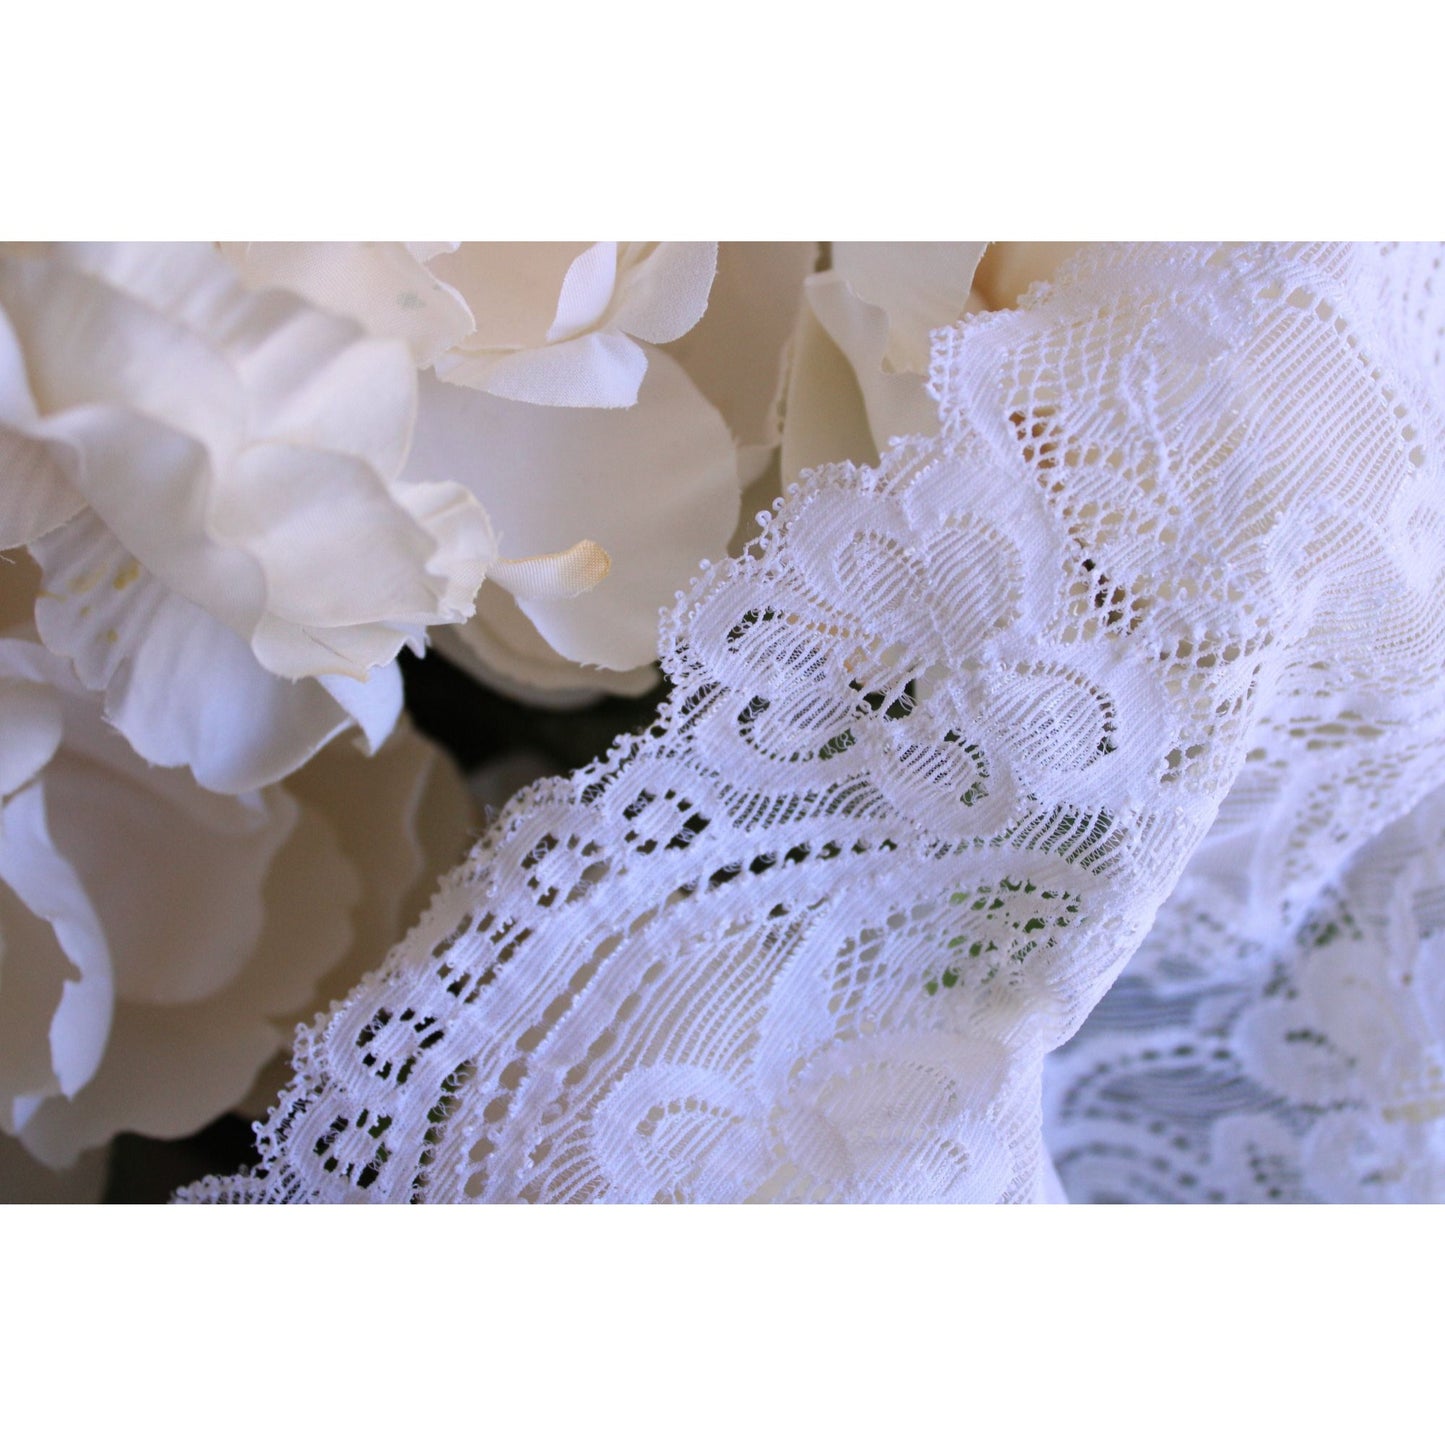 Vintage 1980s 1990s Stretch Lace Trim, White, 2 yards, 6.75" wide